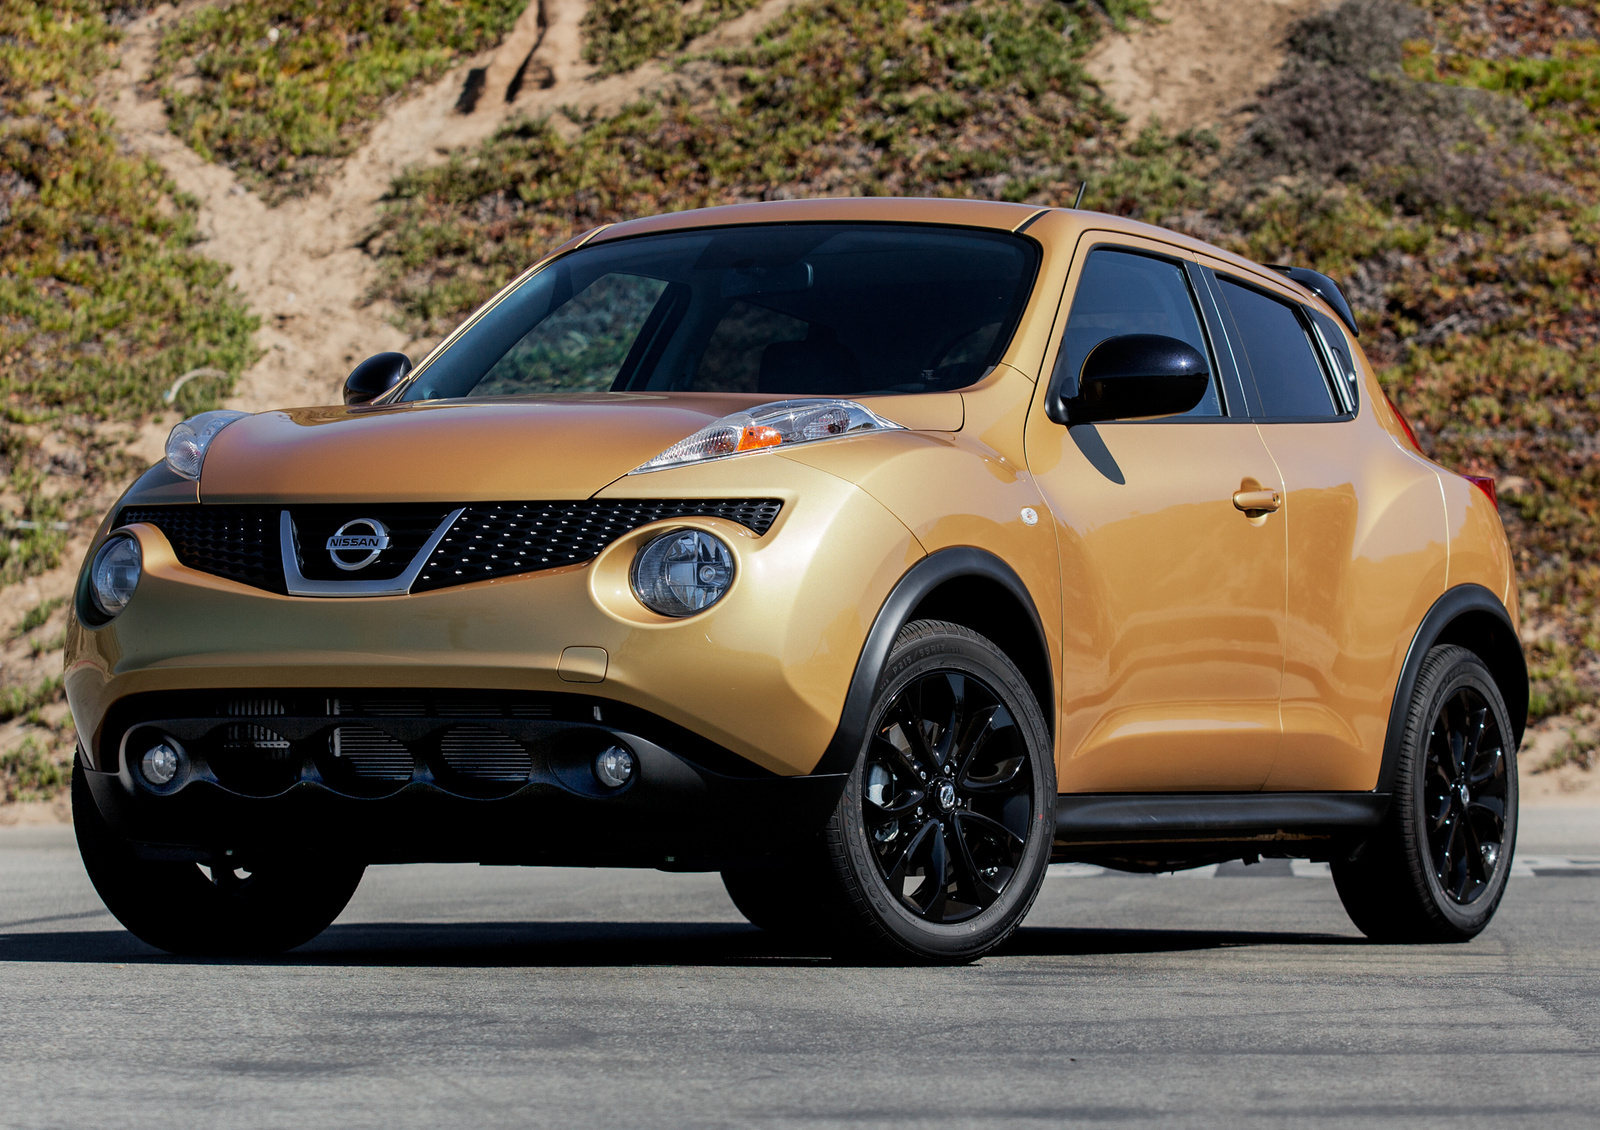 2014 Nissan Juke: Prices, Reviews & Pictures - CarGurus